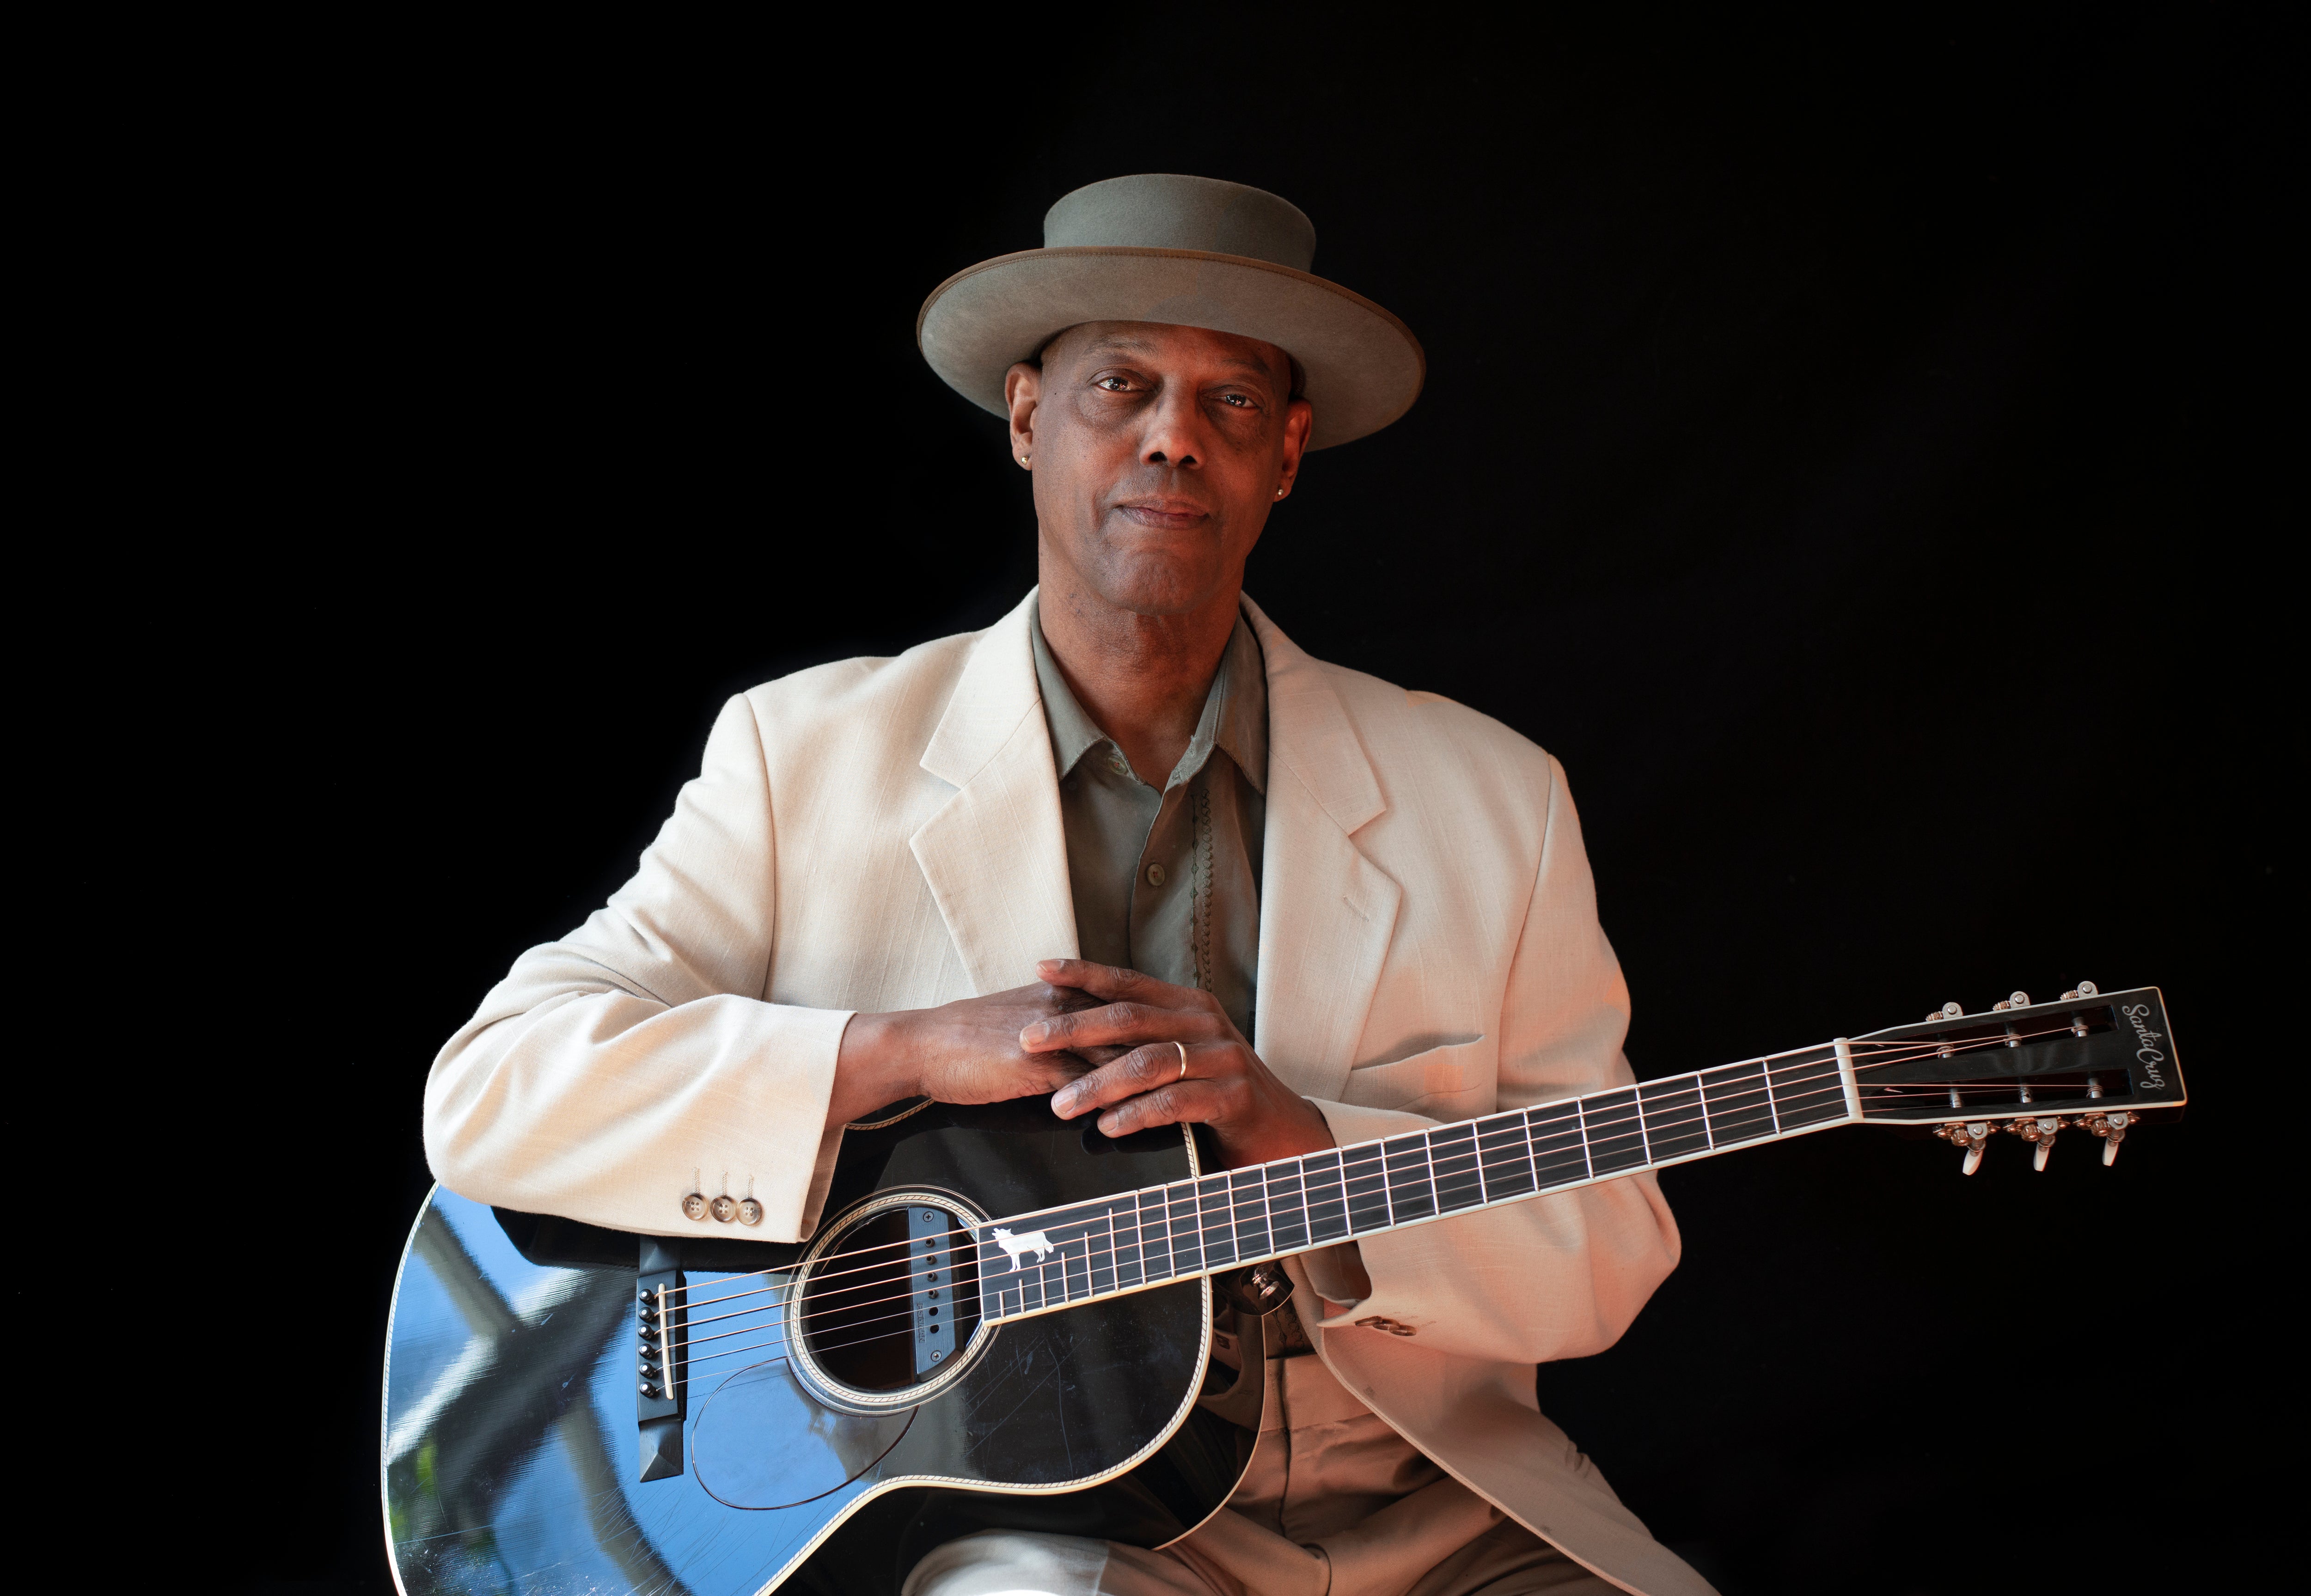 Image used with permission from Ticketmaster | Eric Bibb tickets